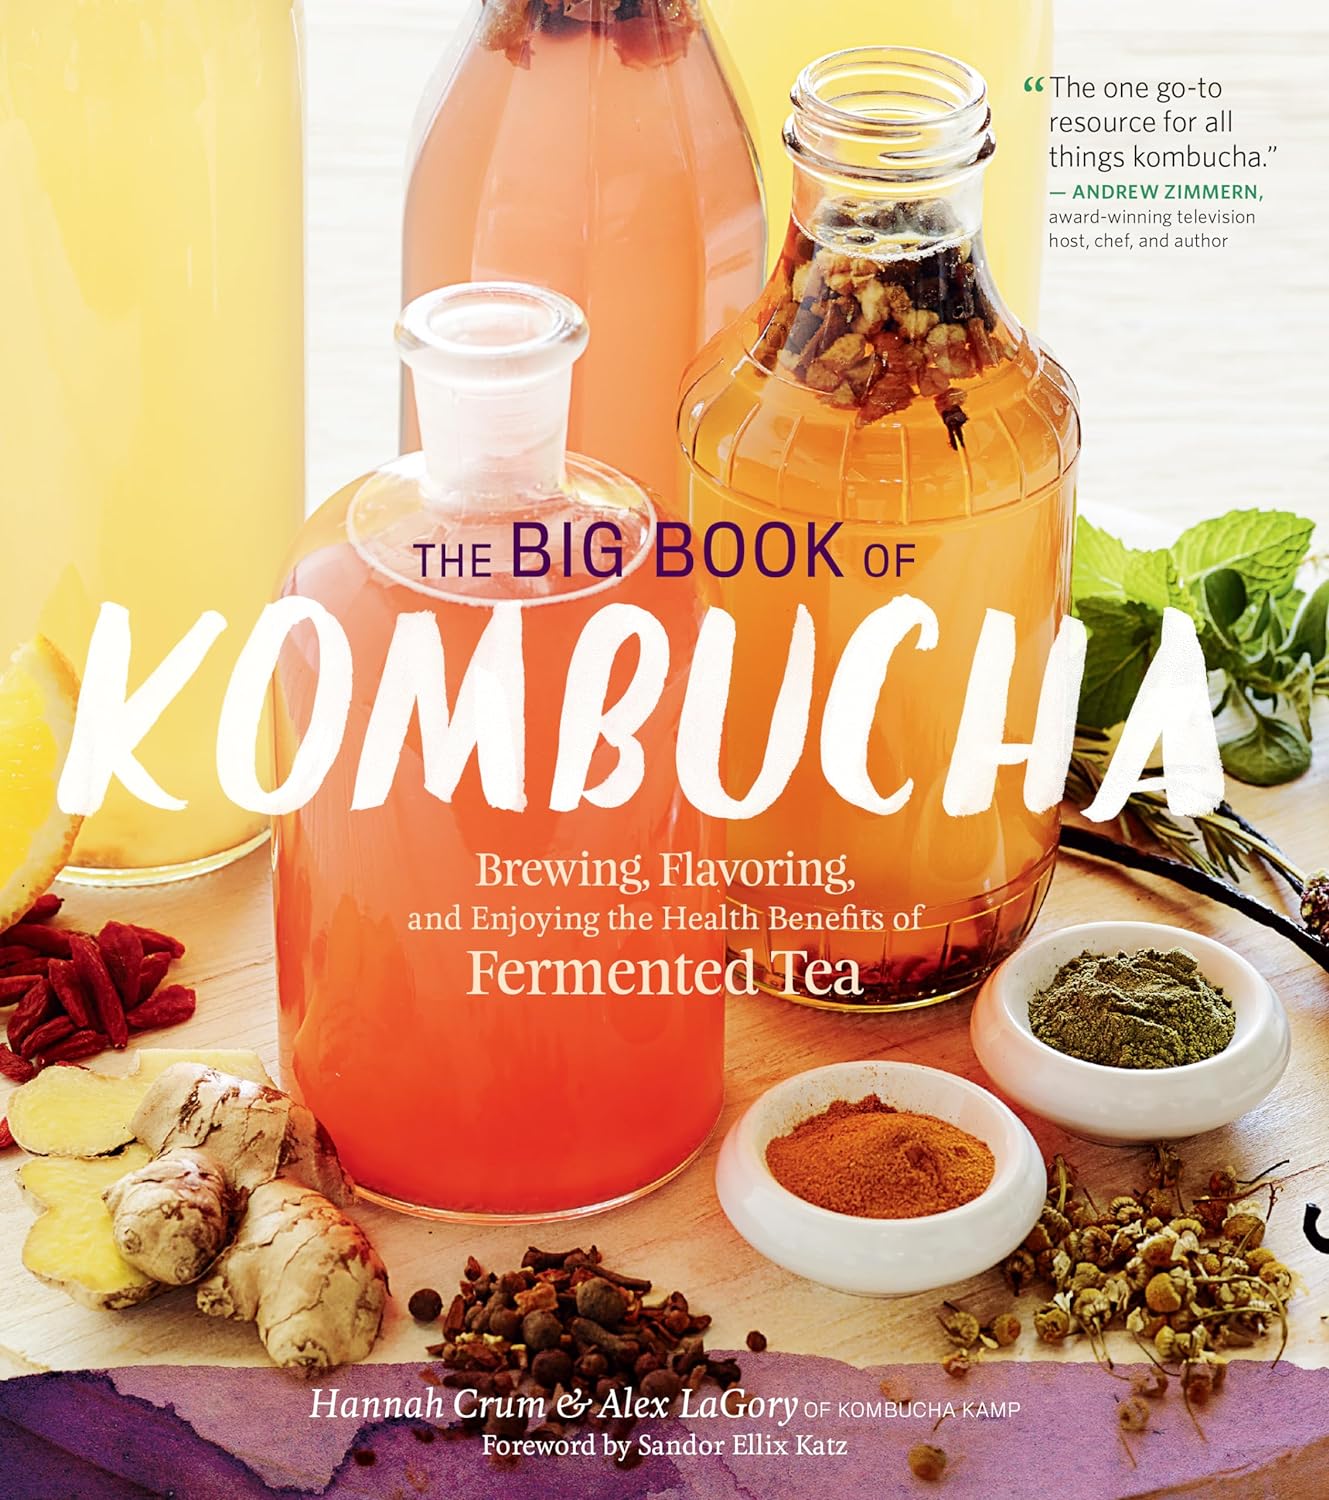 The Big Book of Kombucha: Brewing, Flavoring, and Enjoying the Health Benefits of Fermented Tea (Hannah Crum, Alex LaGory)